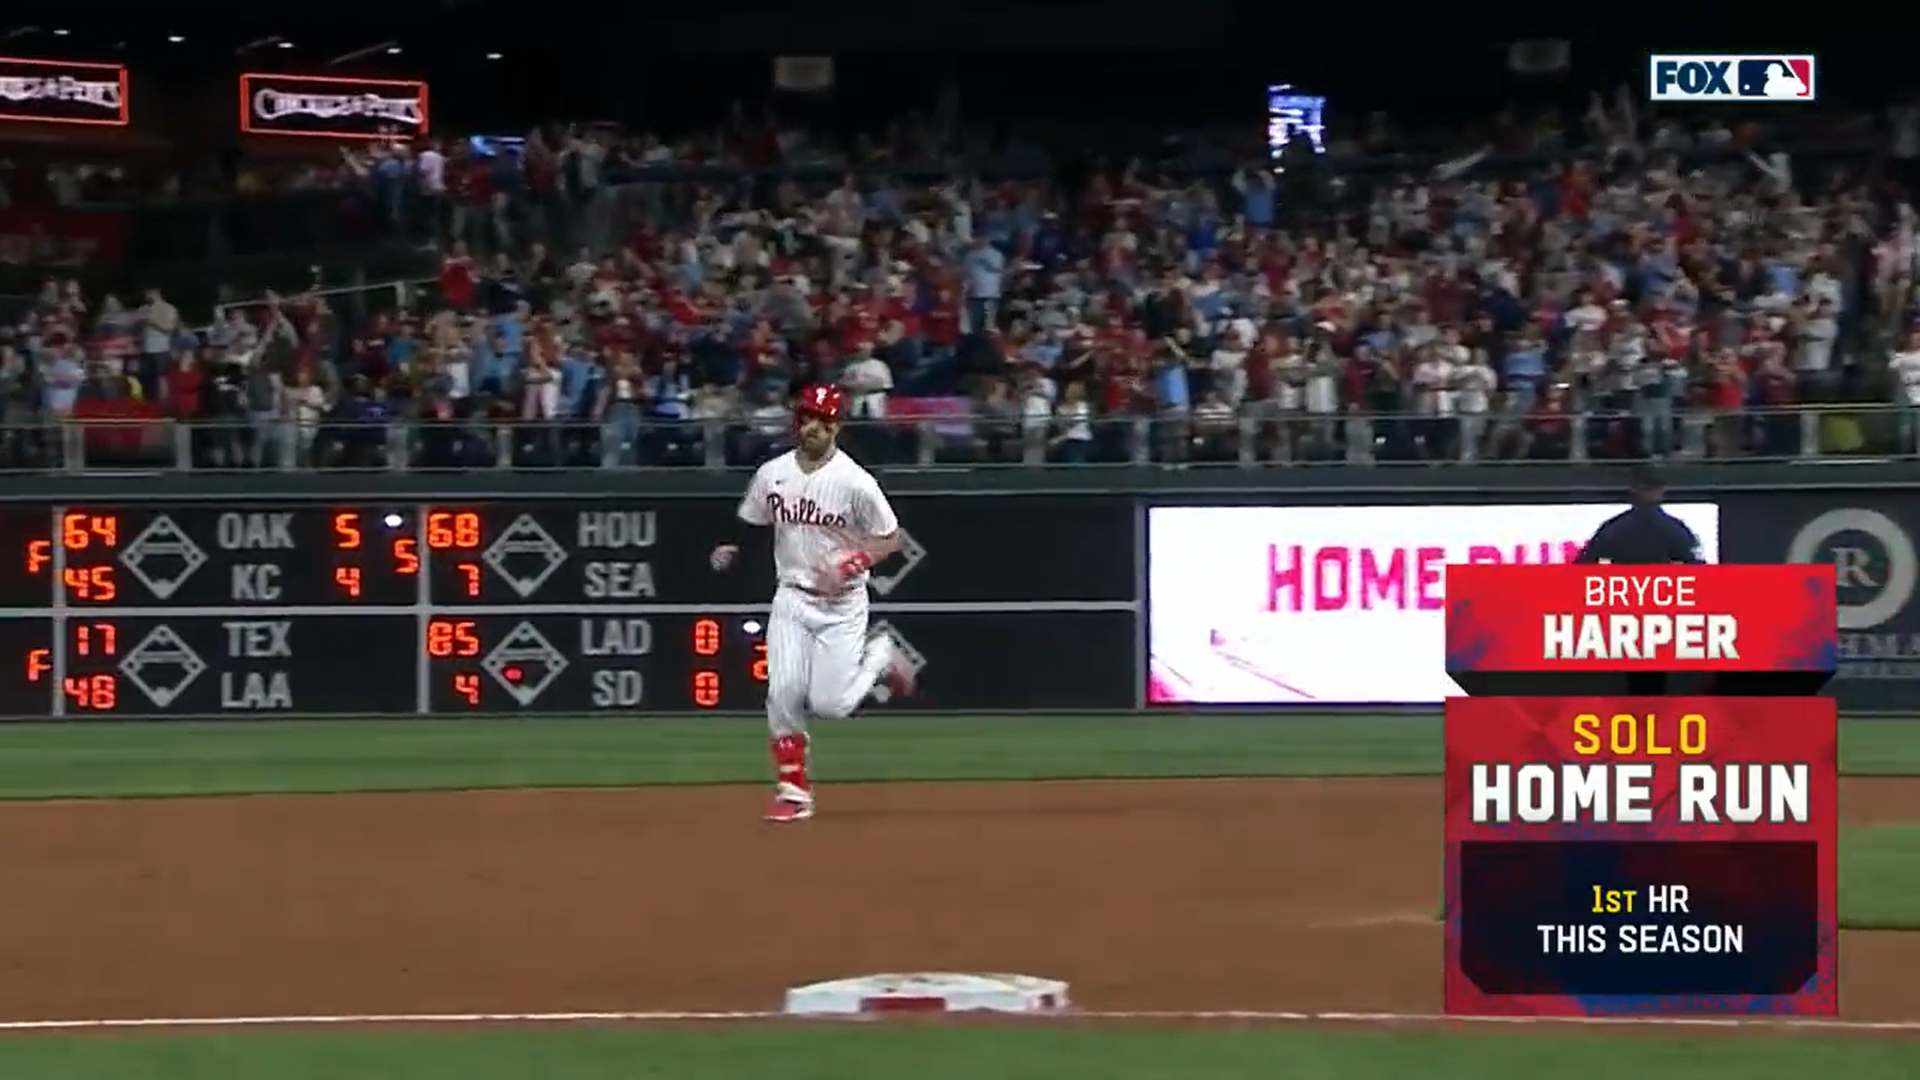 Bryce Harper goes Deep for 1st HR of the season after Tommy John Surgery, Fans react to HR